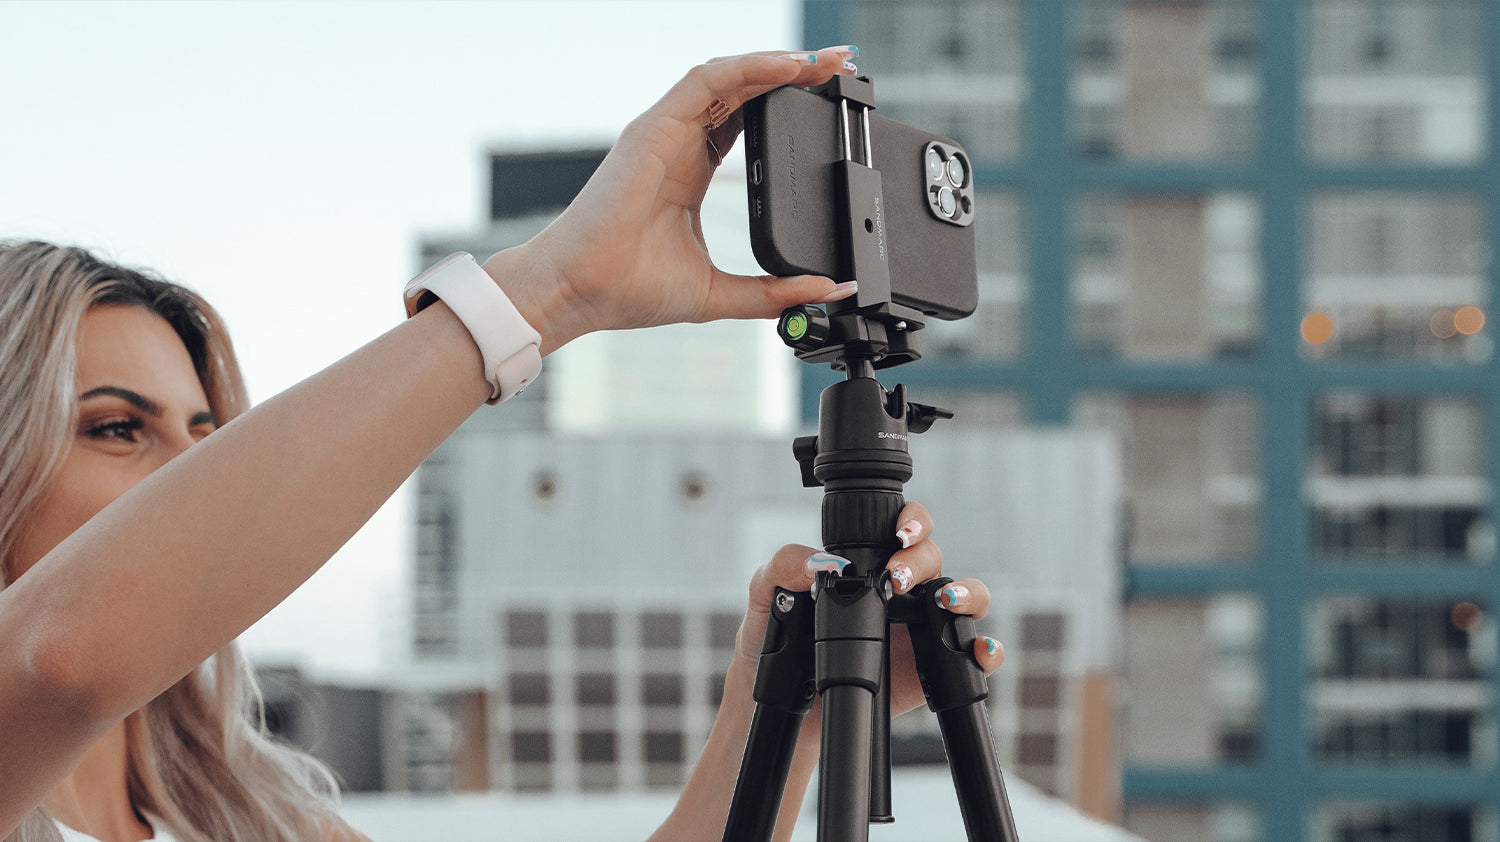 How to Use an iPhone Tripod: A Simple Guide